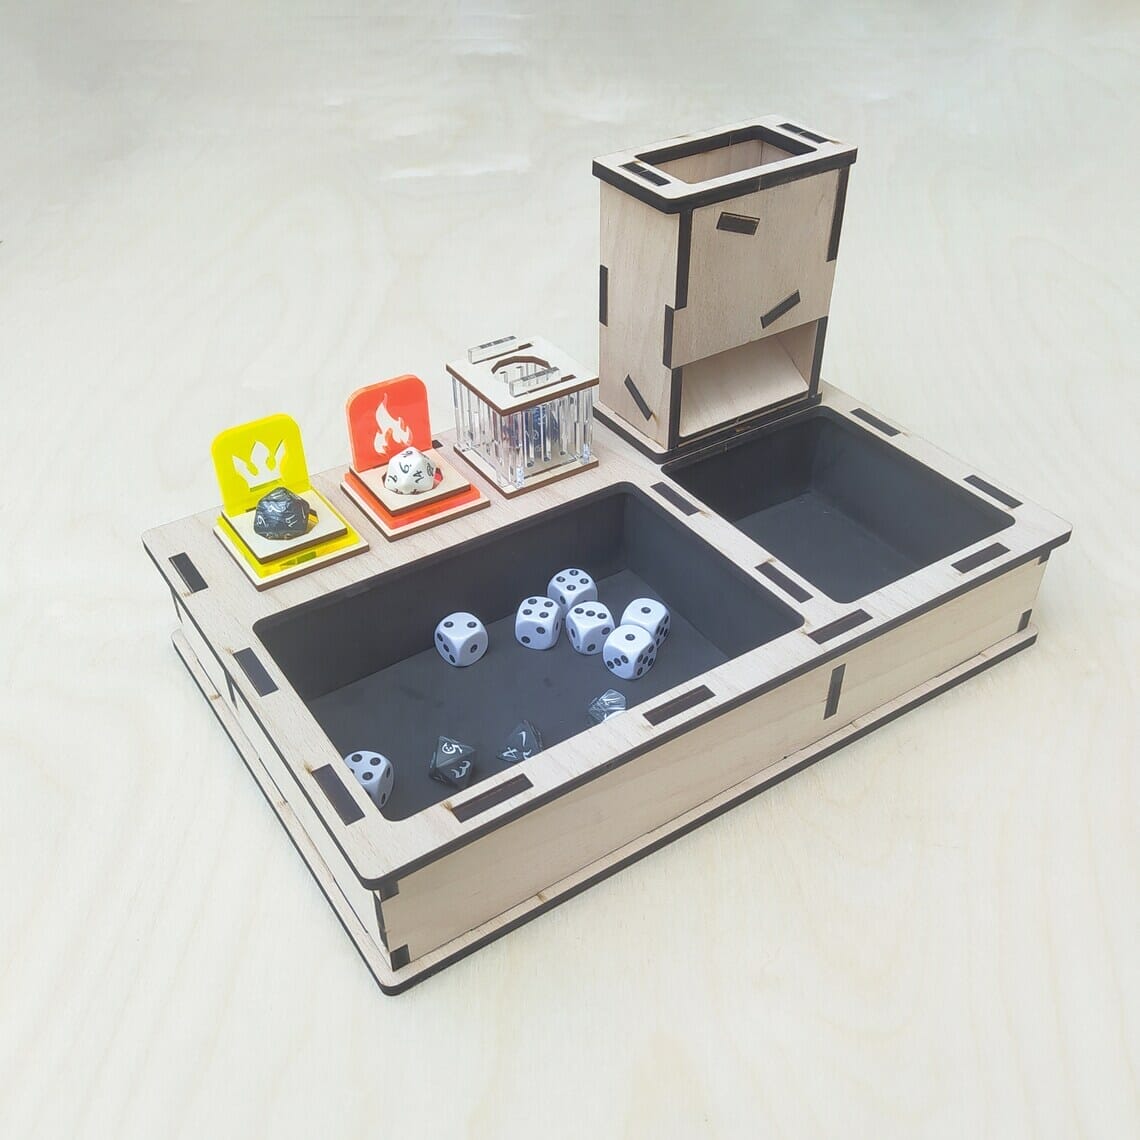 Dice tray and tower